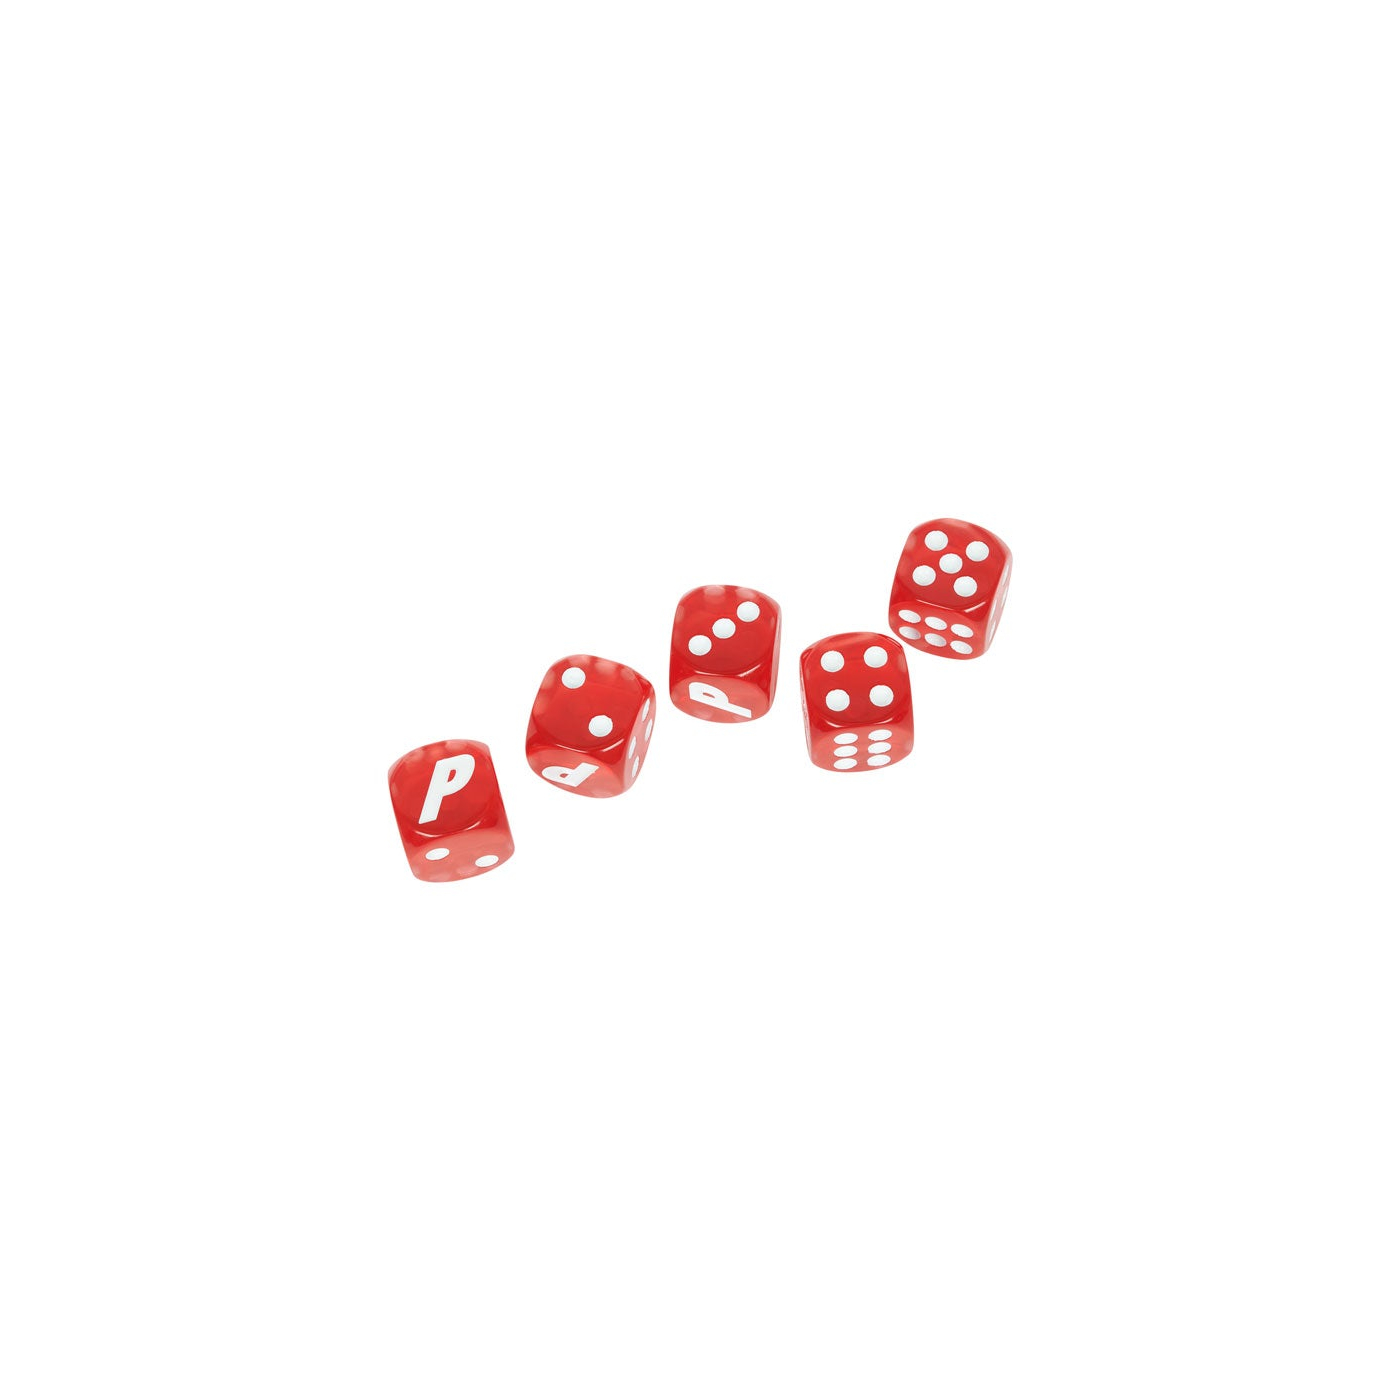 Thumbnail PALACE DICE RED one color